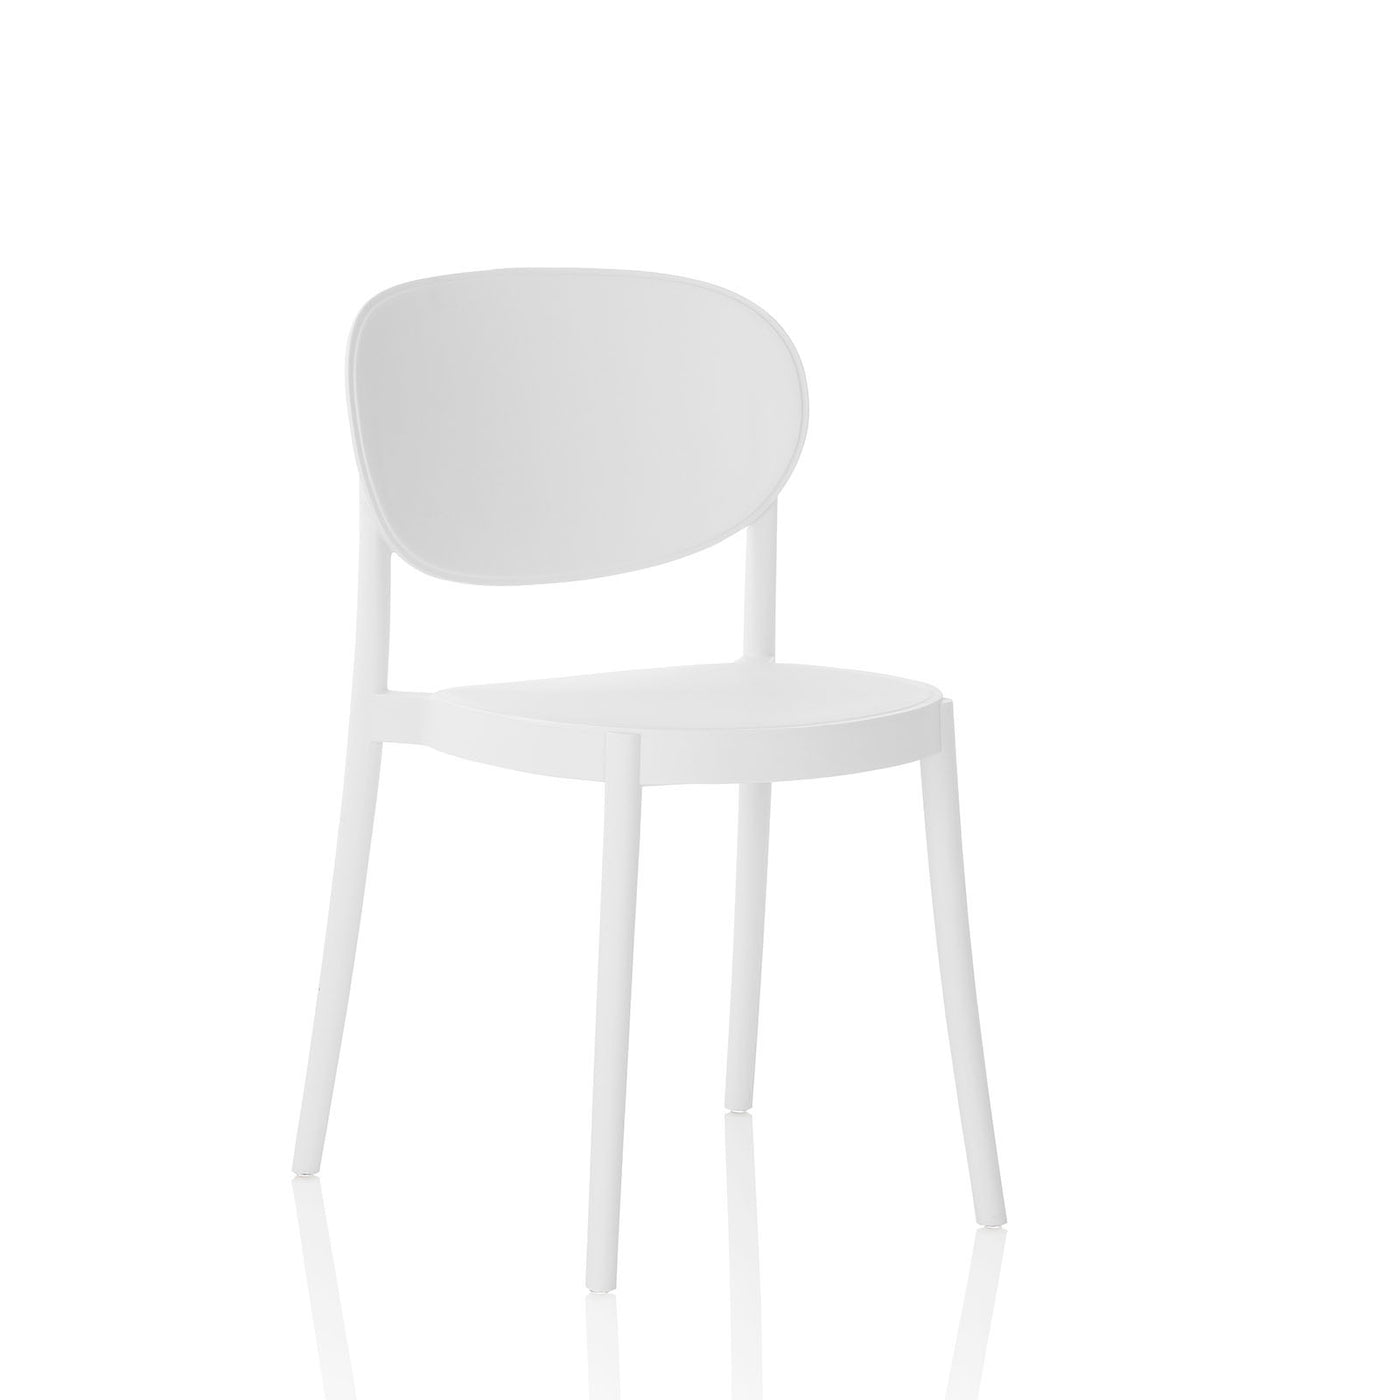 Set of 4 white ICE indoor/outdoor chairs